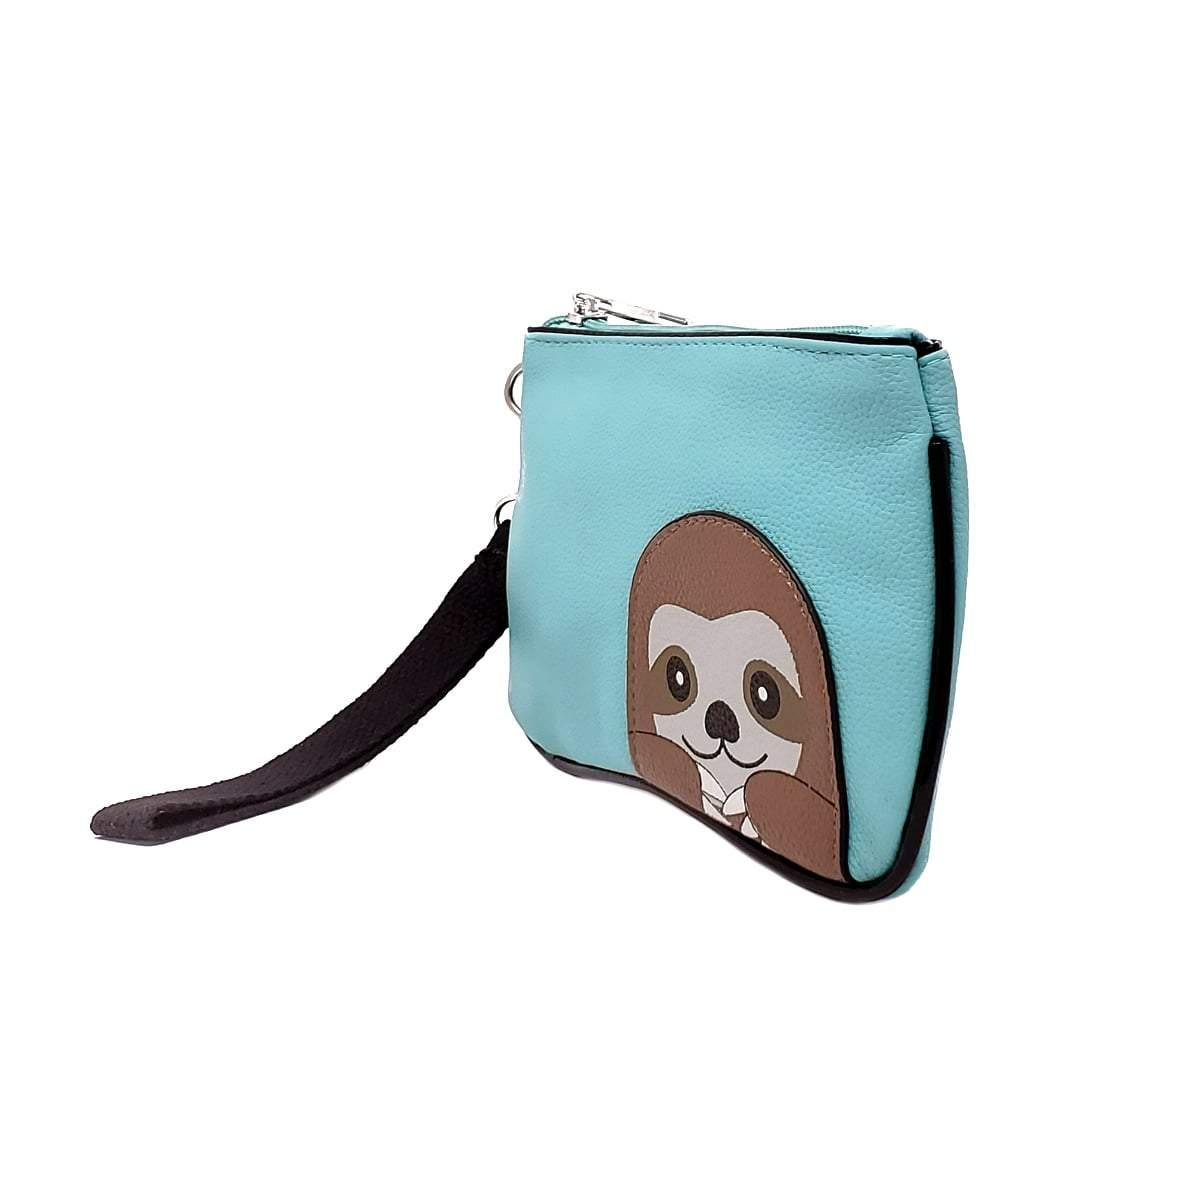 Sleepyville Critters - Sloth Small Puch Shoulder Bag in Vinyl Material